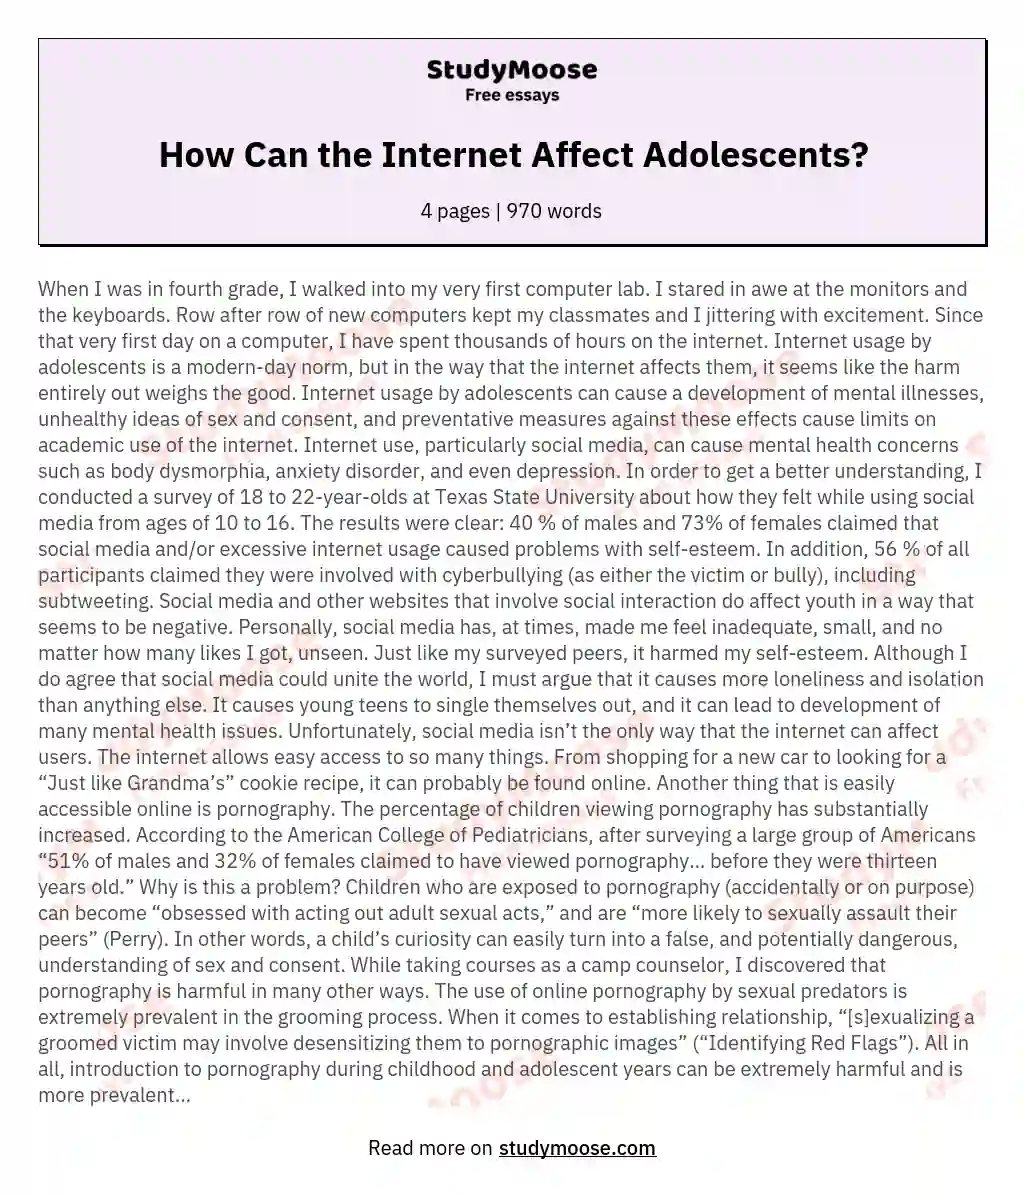 How Can the Internet Affect Adolescents? essay